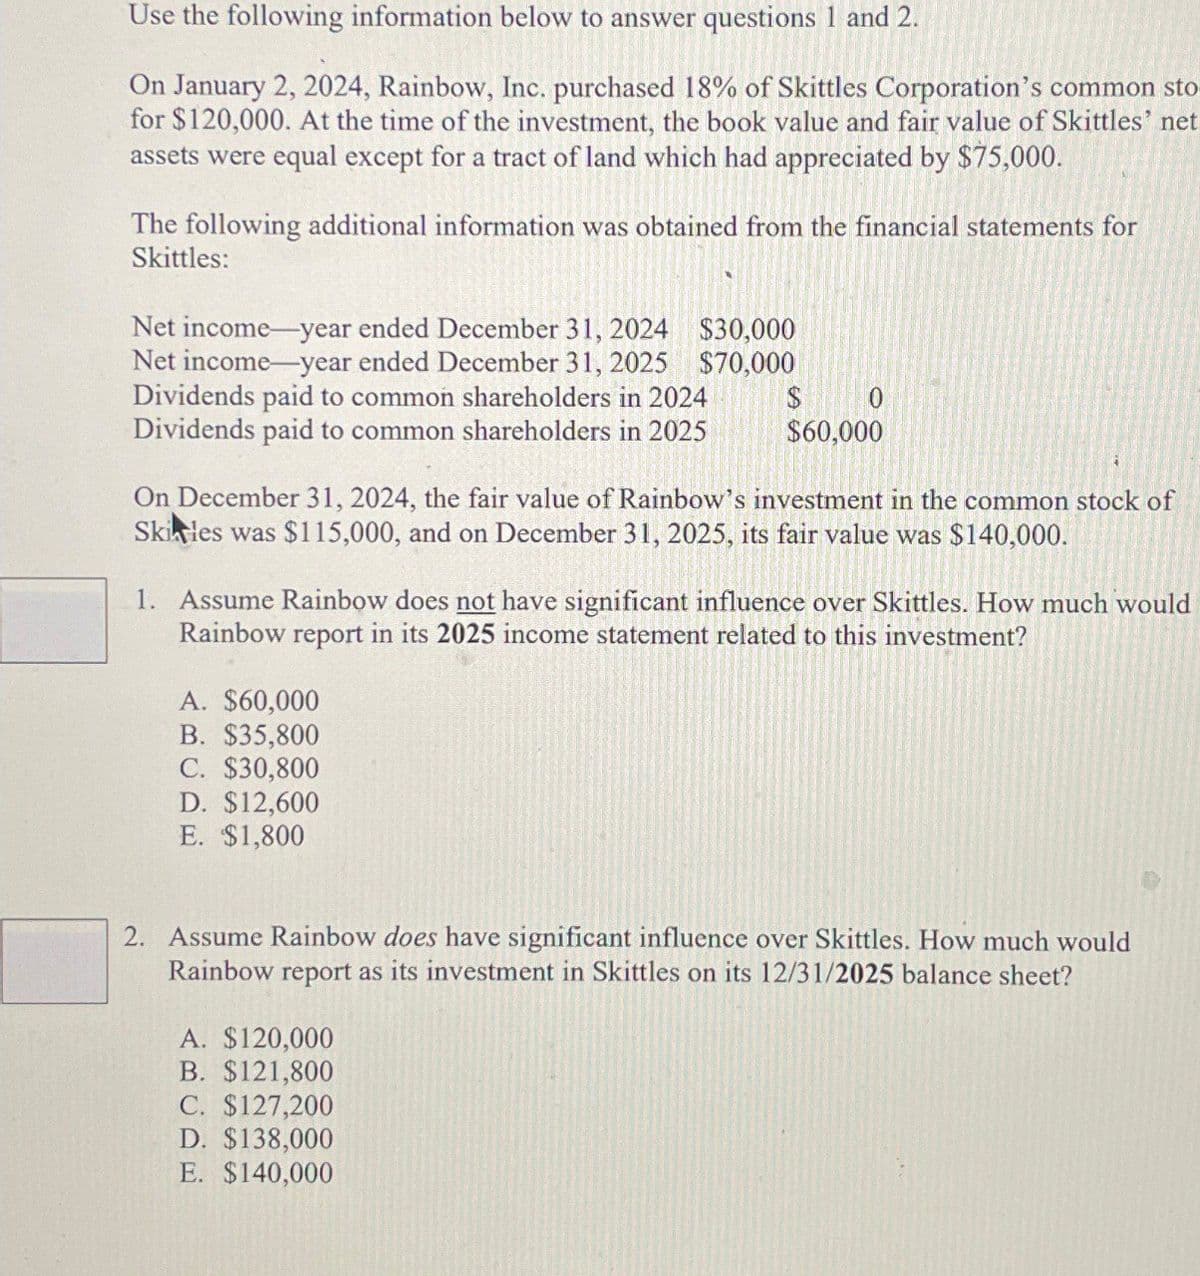 Use the following information below to answer questions 1 and 2.
On January 2, 2024, Rainbow, Inc. purchased 18% of Skittles Corporation's common sto
for $120,000. At the time of the investment, the book value and fair value of Skittles' net
assets were equal except for a tract of land which had appreciated by $75,000.
The following additional information was obtained from the financial statements for
Skittles:
Net income-year ended December 31, 2024
Net income-year ended December 31, 2025
Dividends paid to common shareholders in 2024
Dividends paid to common shareholders in 2025
$30,000
$70,000
$
0
$60,000
On December 31, 2024, the fair value of Rainbow's investment in the common stock of
Skiles was $115,000, and on December 31, 2025, its fair value was $140,000.
1. Assume Rainbow does not have significant influence over Skittles. How much would
Rainbow report in its 2025 income statement related to this investment?
A. $60,000
B. $35,800
C. $30,800
D. $12,600
E. $1,800
2. Assume Rainbow does have significant influence over Skittles. How much would
Rainbow report as its investment in Skittles on its 12/31/2025 balance sheet?
A. $120,000
B. $121,800
C. $127,200
D. $138,000
E. $140,000